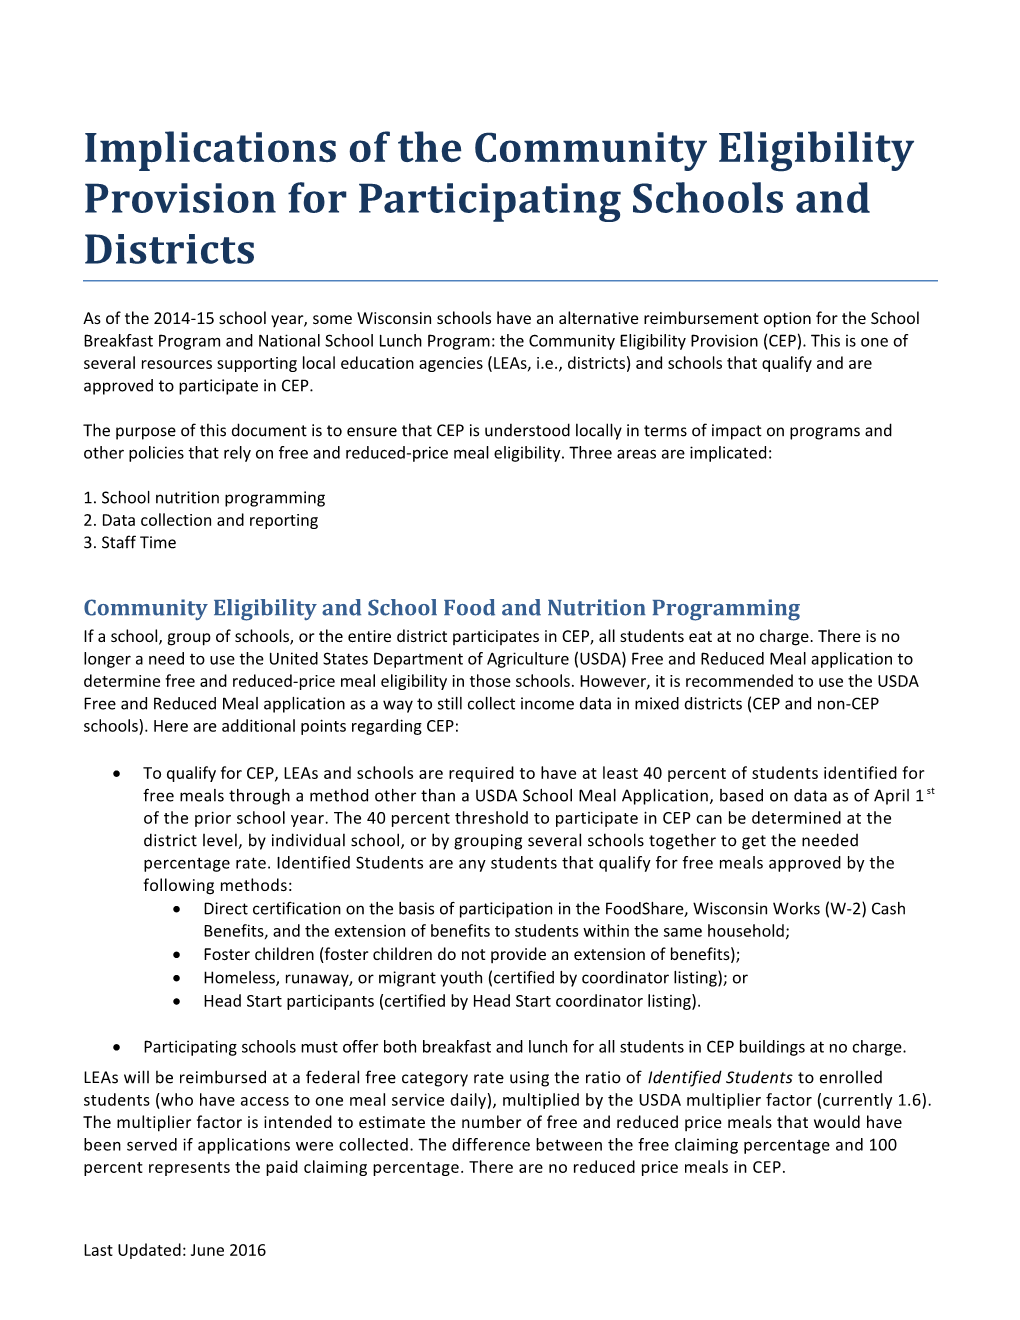 Implications of the Community Eligibility Provision for Participating Schools and Districts